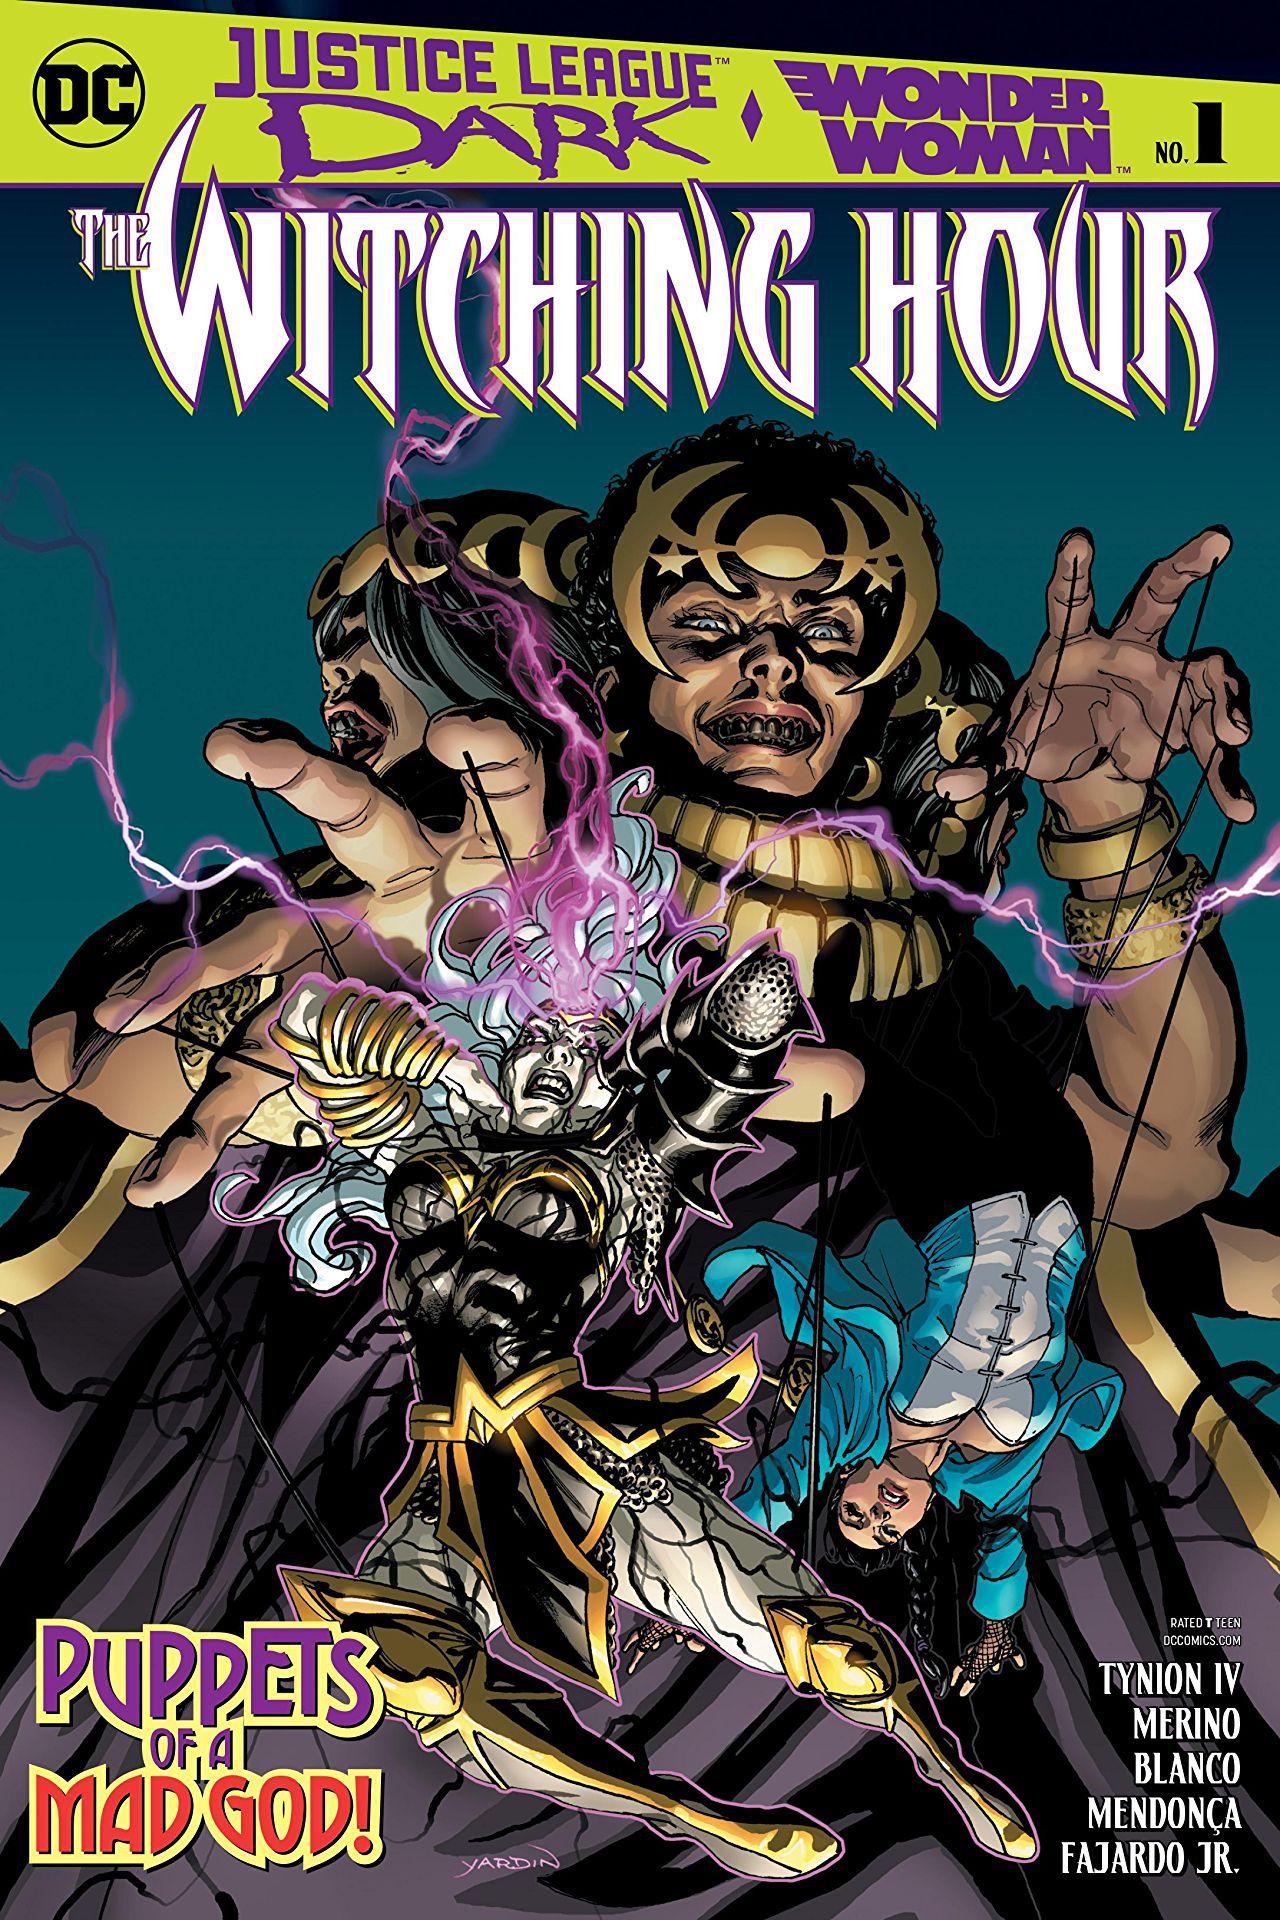 Justice League Dark and Wonder Woman: The Witching Hour Vol. 1 #1